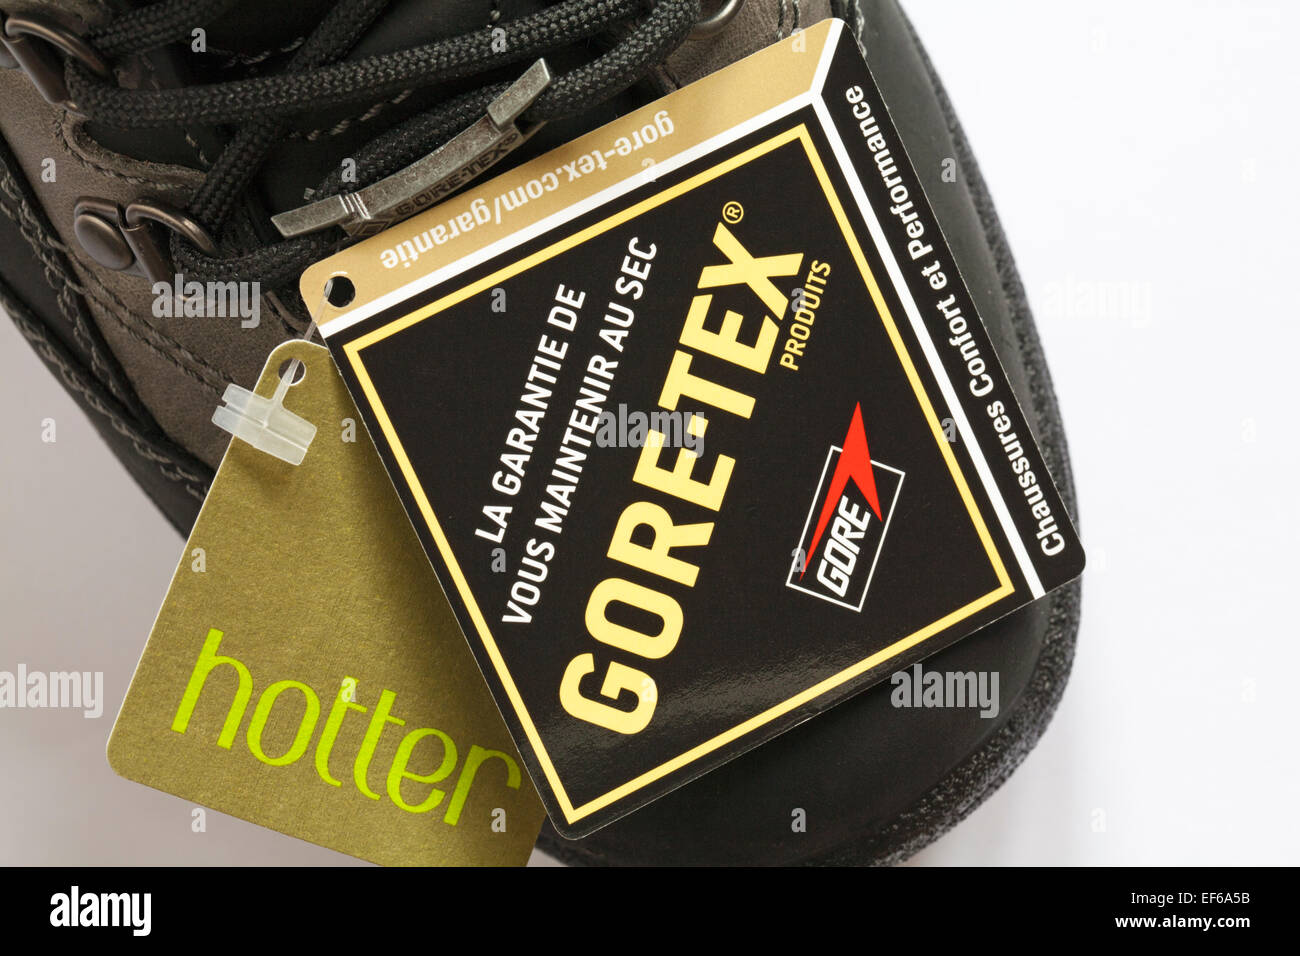 labels on Hotter Gore-tex boots guaranteed to keep you dry Goretex